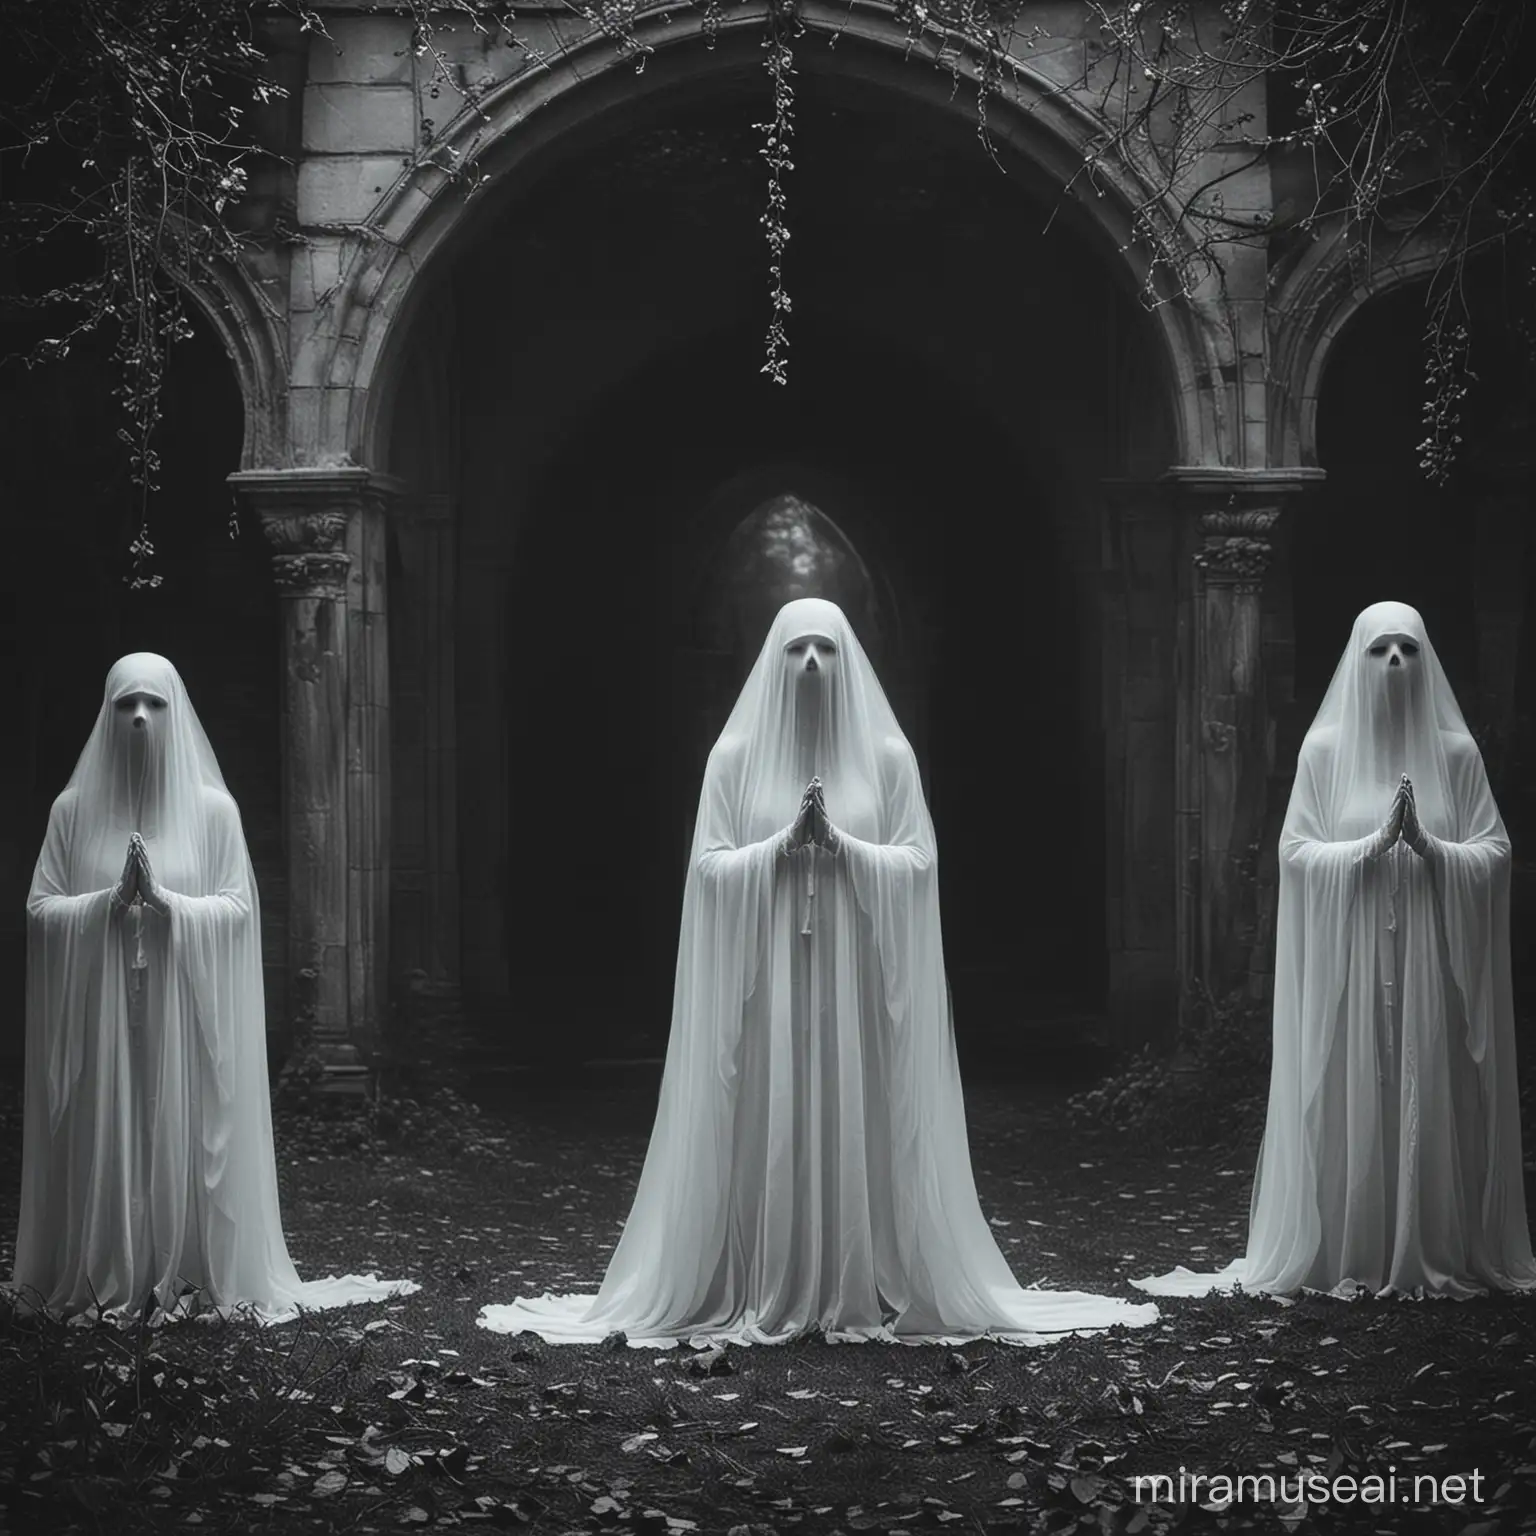 👻💫 Spectral Apparitions Challenge 💫👻

The veil between worlds is thinning, and the spirits are restless. Our Creepy AI group is ready to capture the essence of these ethereal beings. Are you prepared to peer into the realm of the spectral?

🎨 This week's challenge: Create images that embodies the haunting presence of apparitions. From wispy figures in old photographs to full-bodied phantoms caught mid-haunt, let your creativity summon the spirits.

📸 Share your spectral masterpiece with us using #CreepyAIChallenge and let's unveil the unseen together. What phantoms will you bring forth from the shadows?

Embrace the spectral challenge and let the whispers of the afterlife inspire your art! 🖌️

@tout le monde